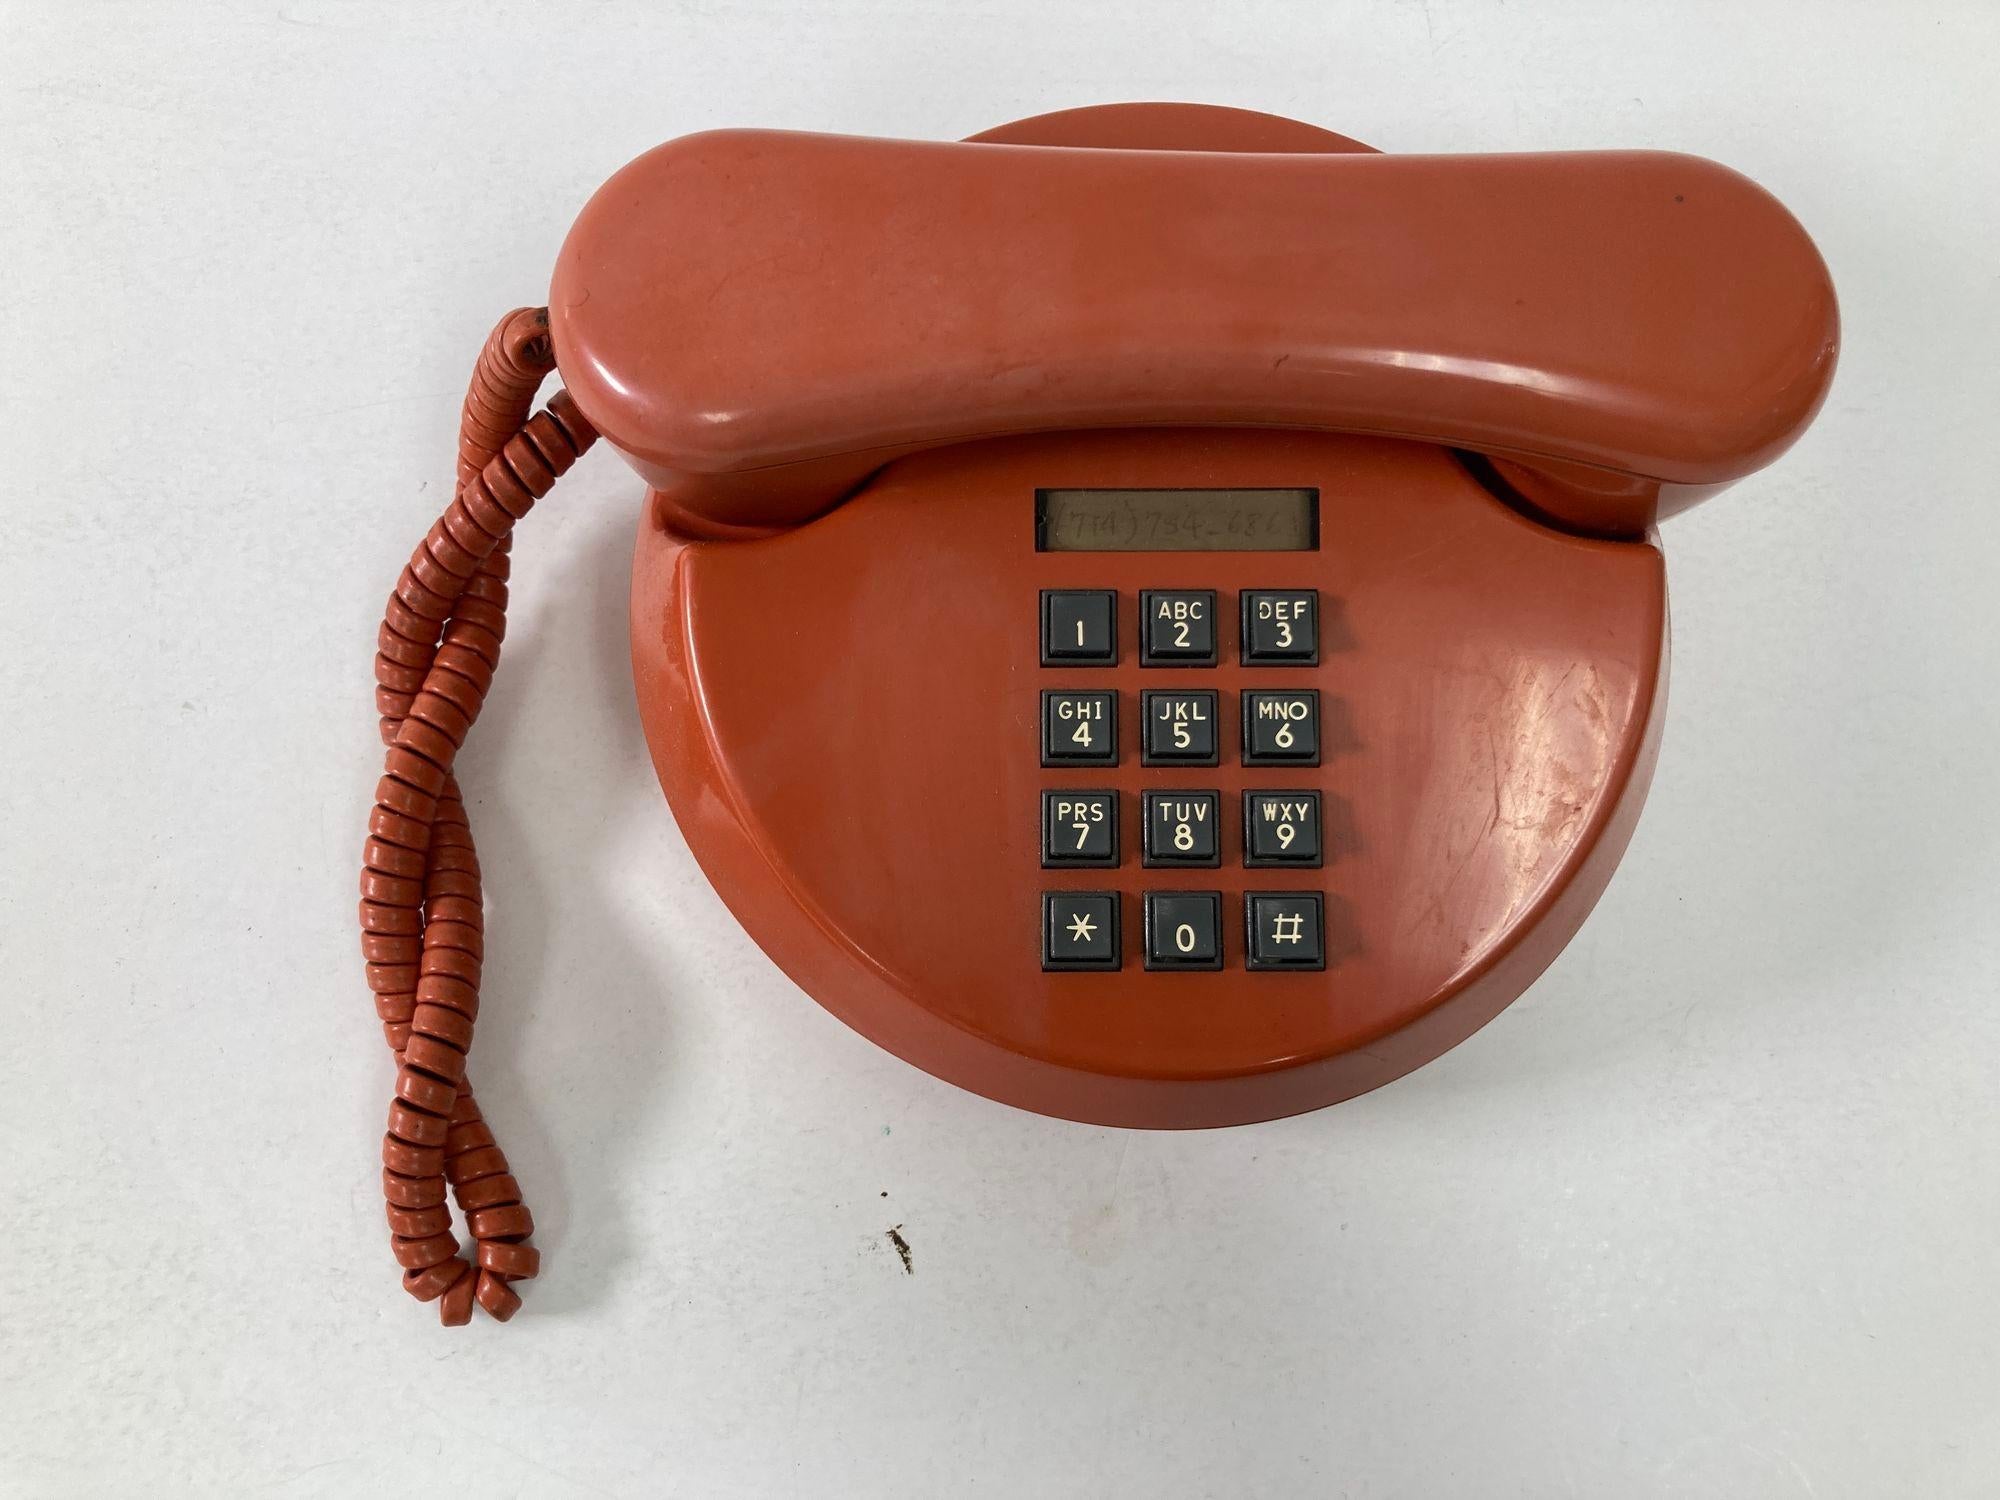 Canadian Vintage Retro Push-Button Round Telephone Burnt Orange Color from the, 70s